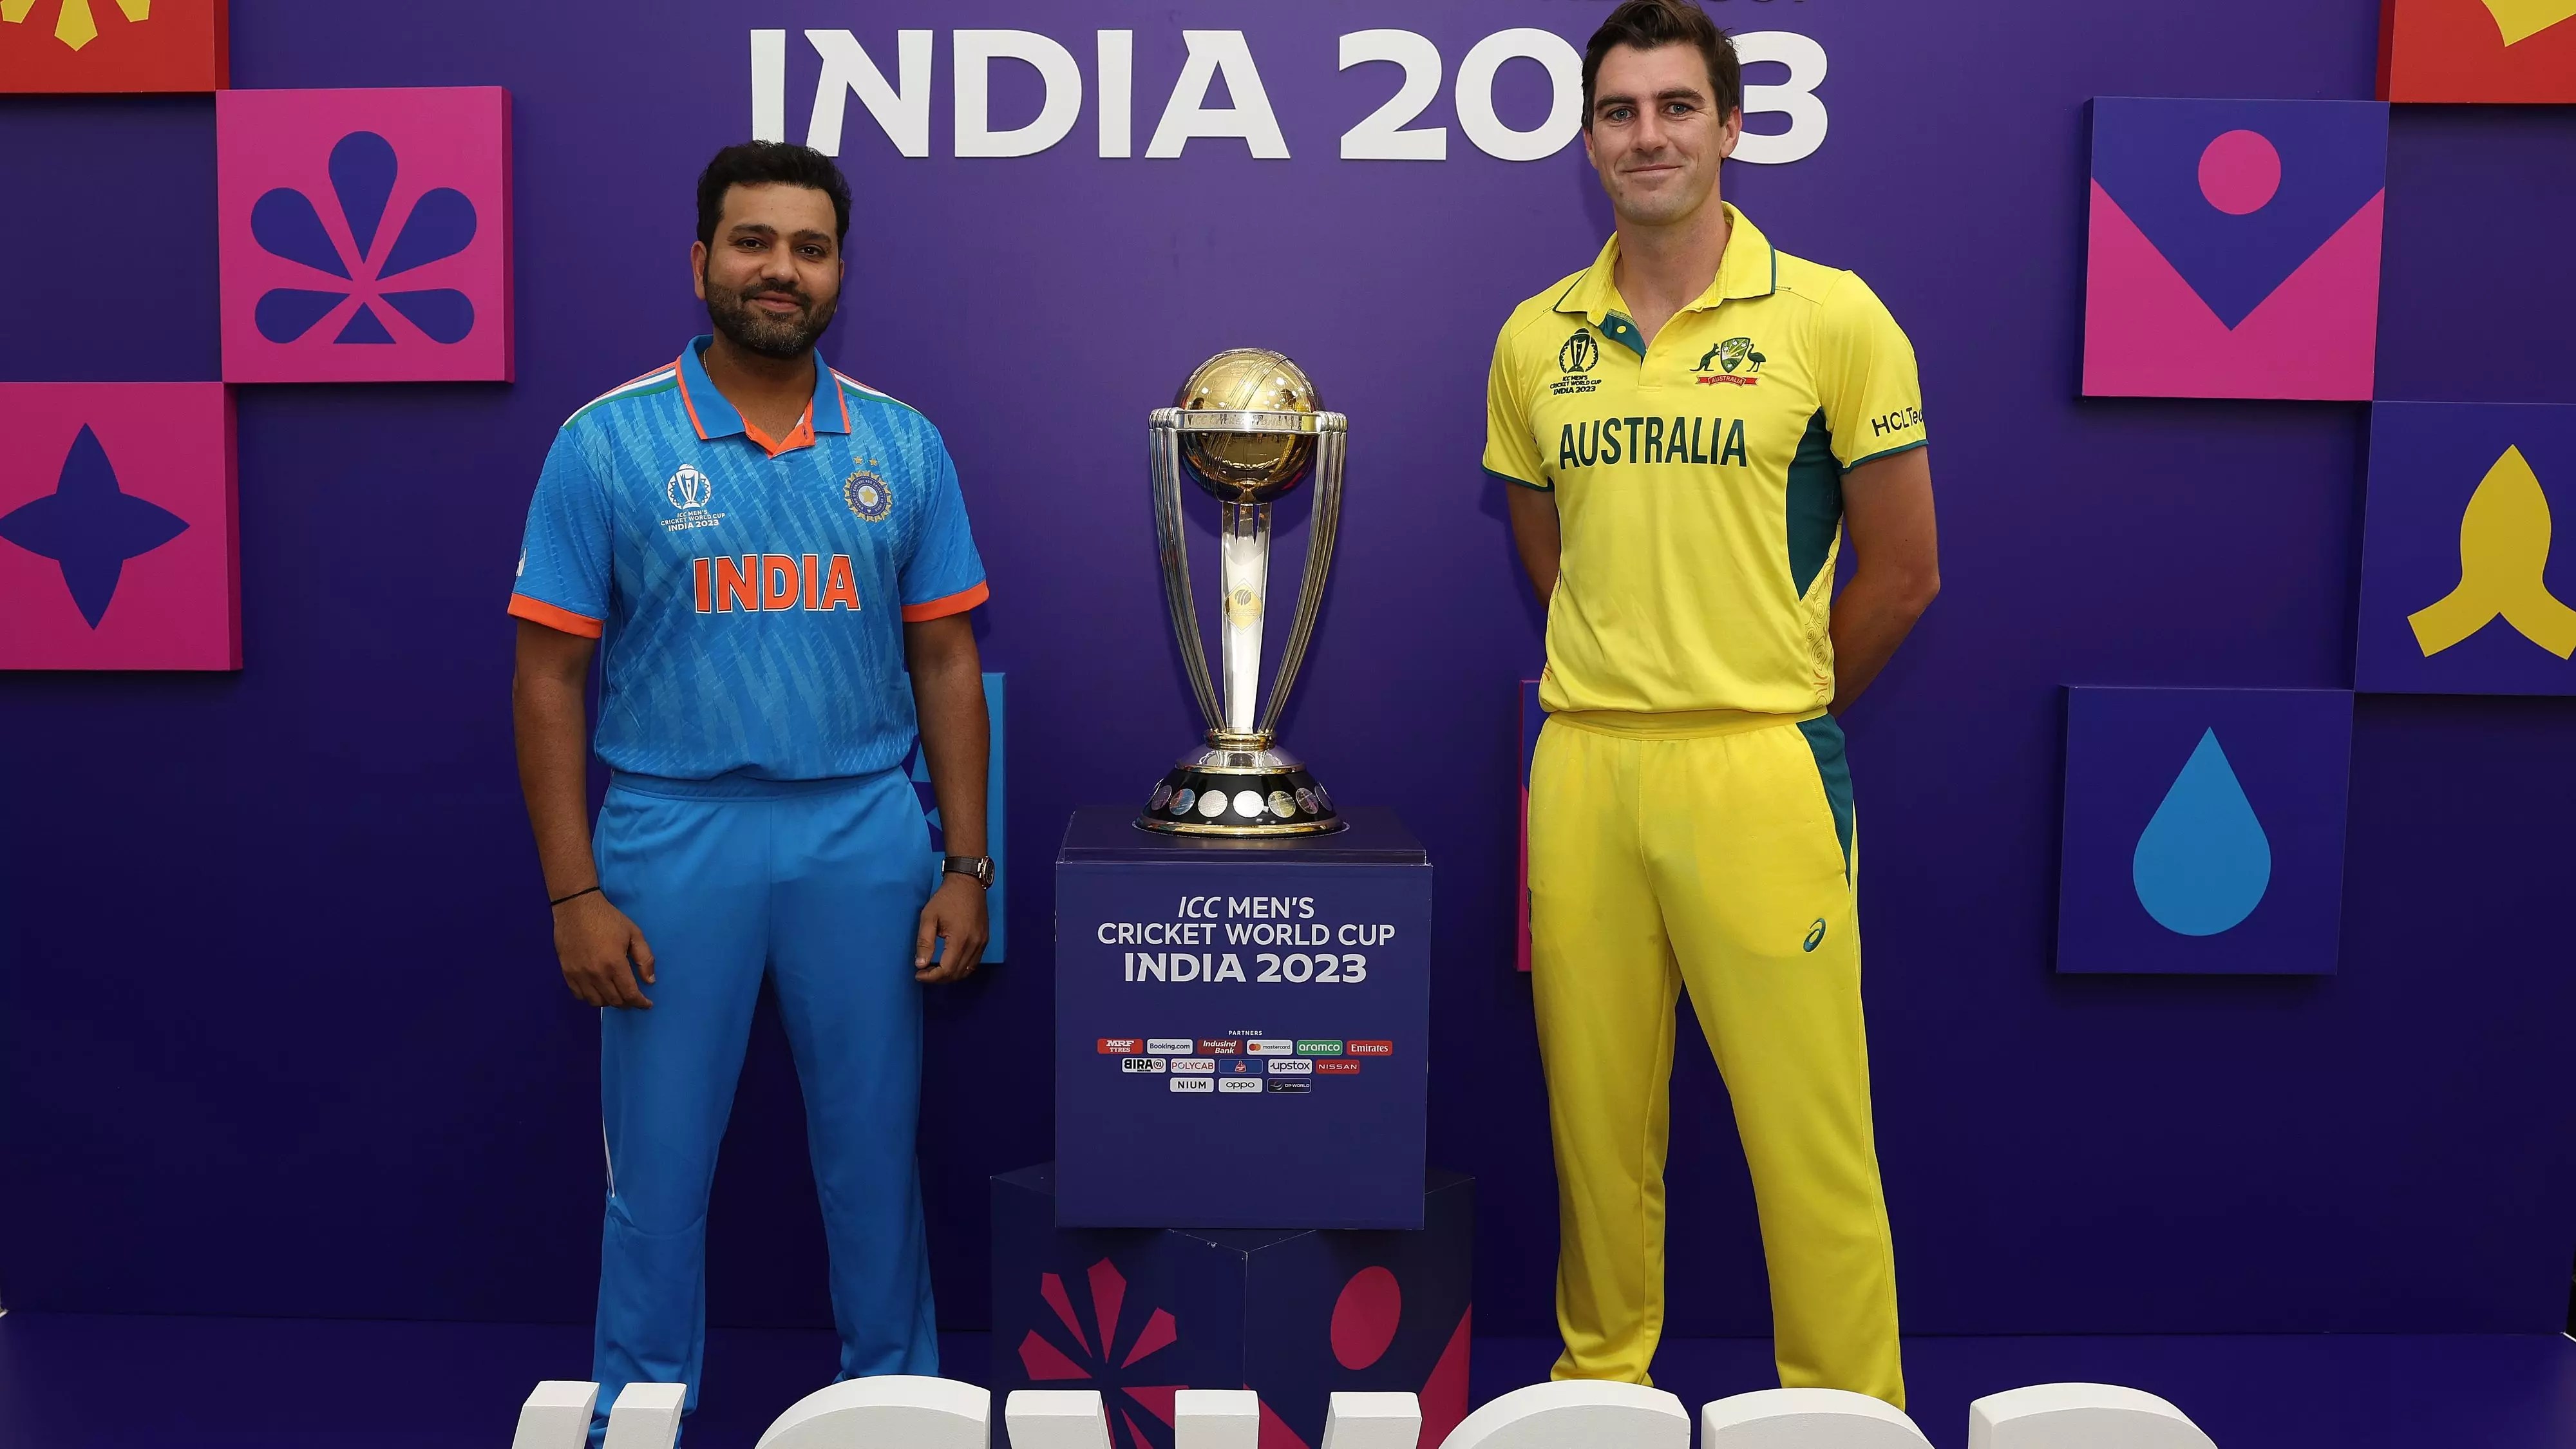 Check out the top 5 ways to watch the live stream of the India vs Australia World Cup 2023 Final on your smartphone and TV.